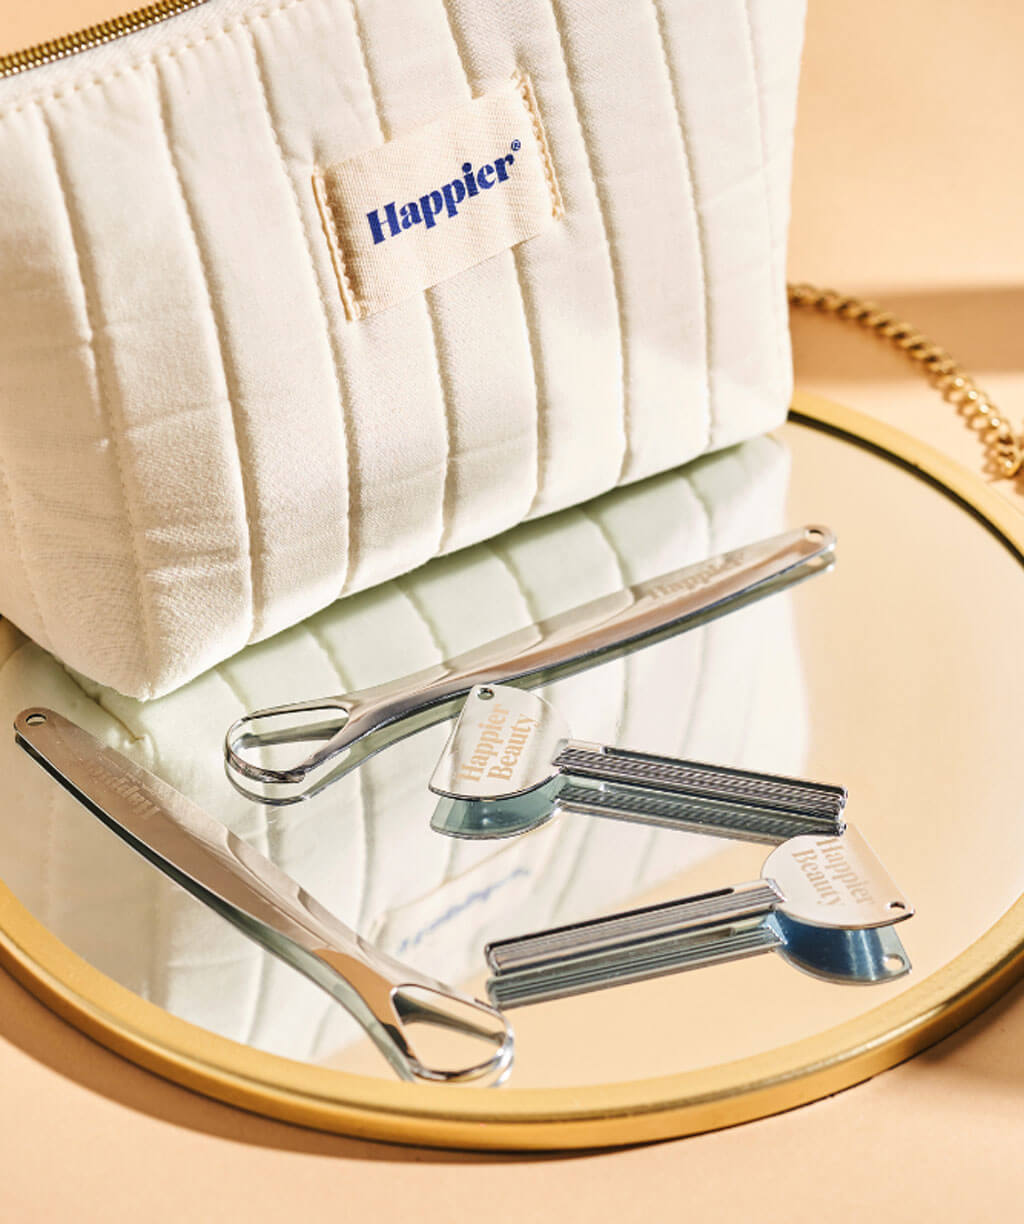 Happier  Beauty essentials: washbag,tongue cleaner,and squeeze key.